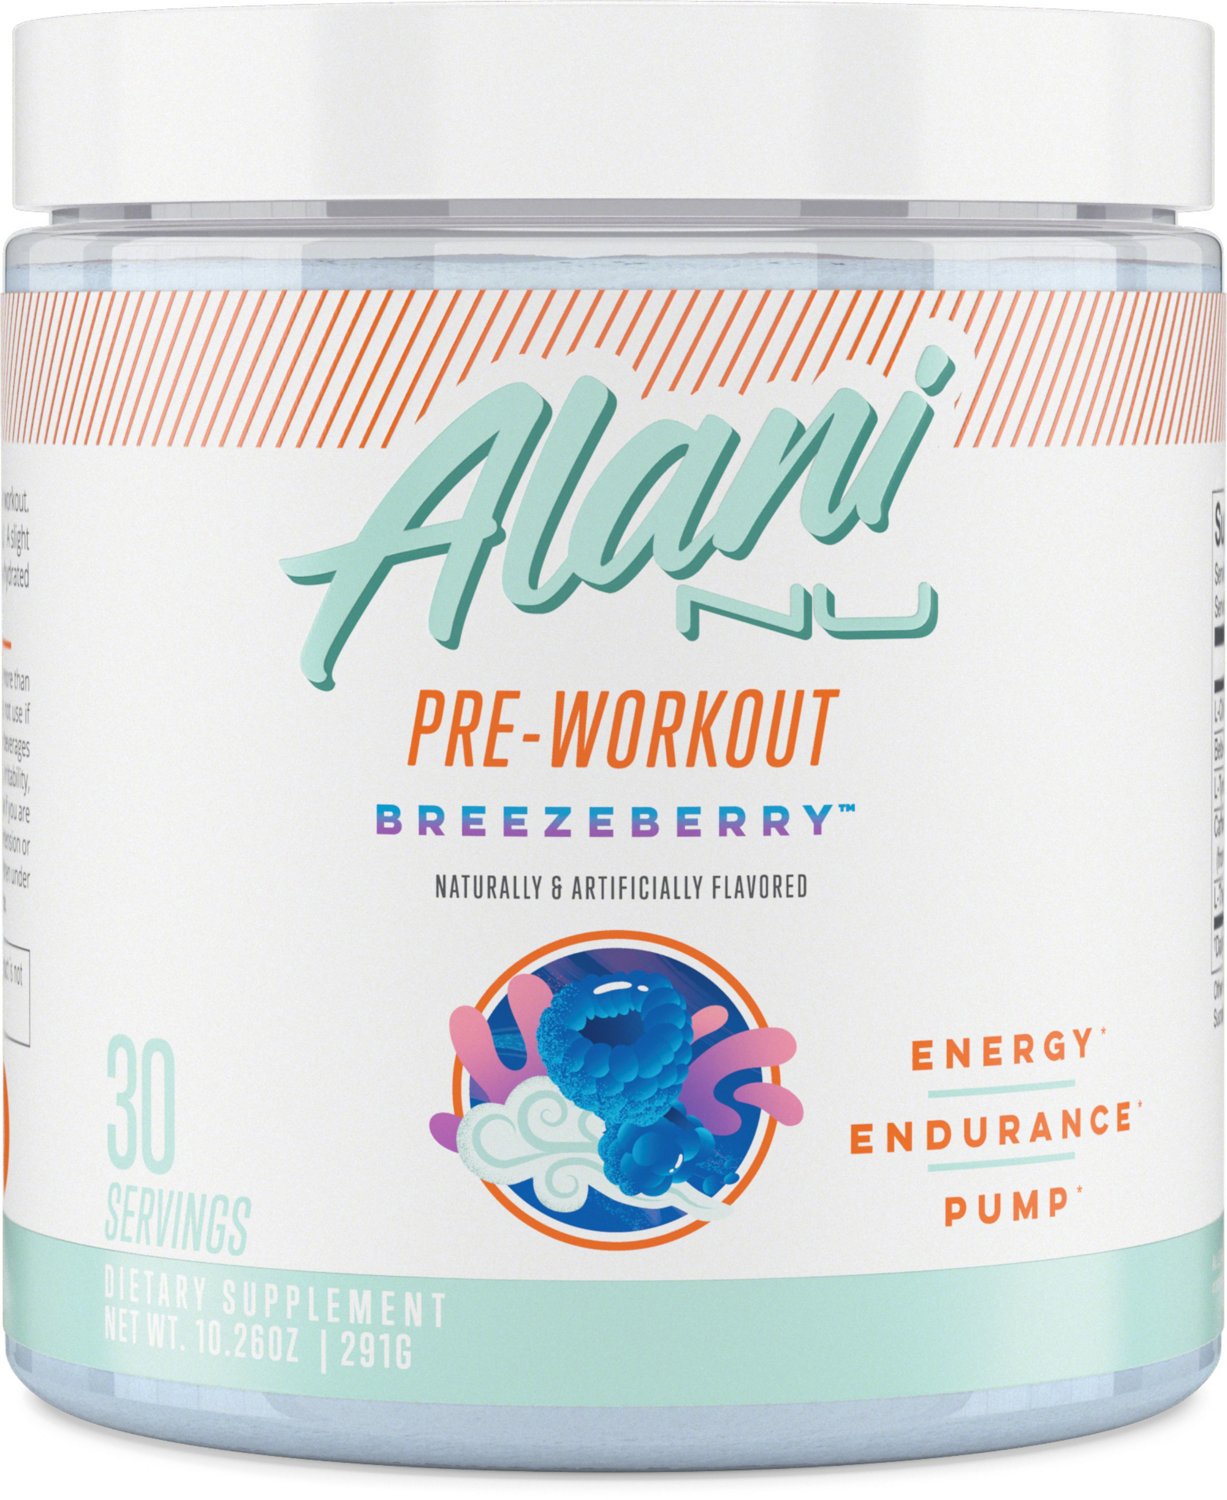 6 Day Alani Nu Pre Workout Rainbow Candy Calories for Build Muscle